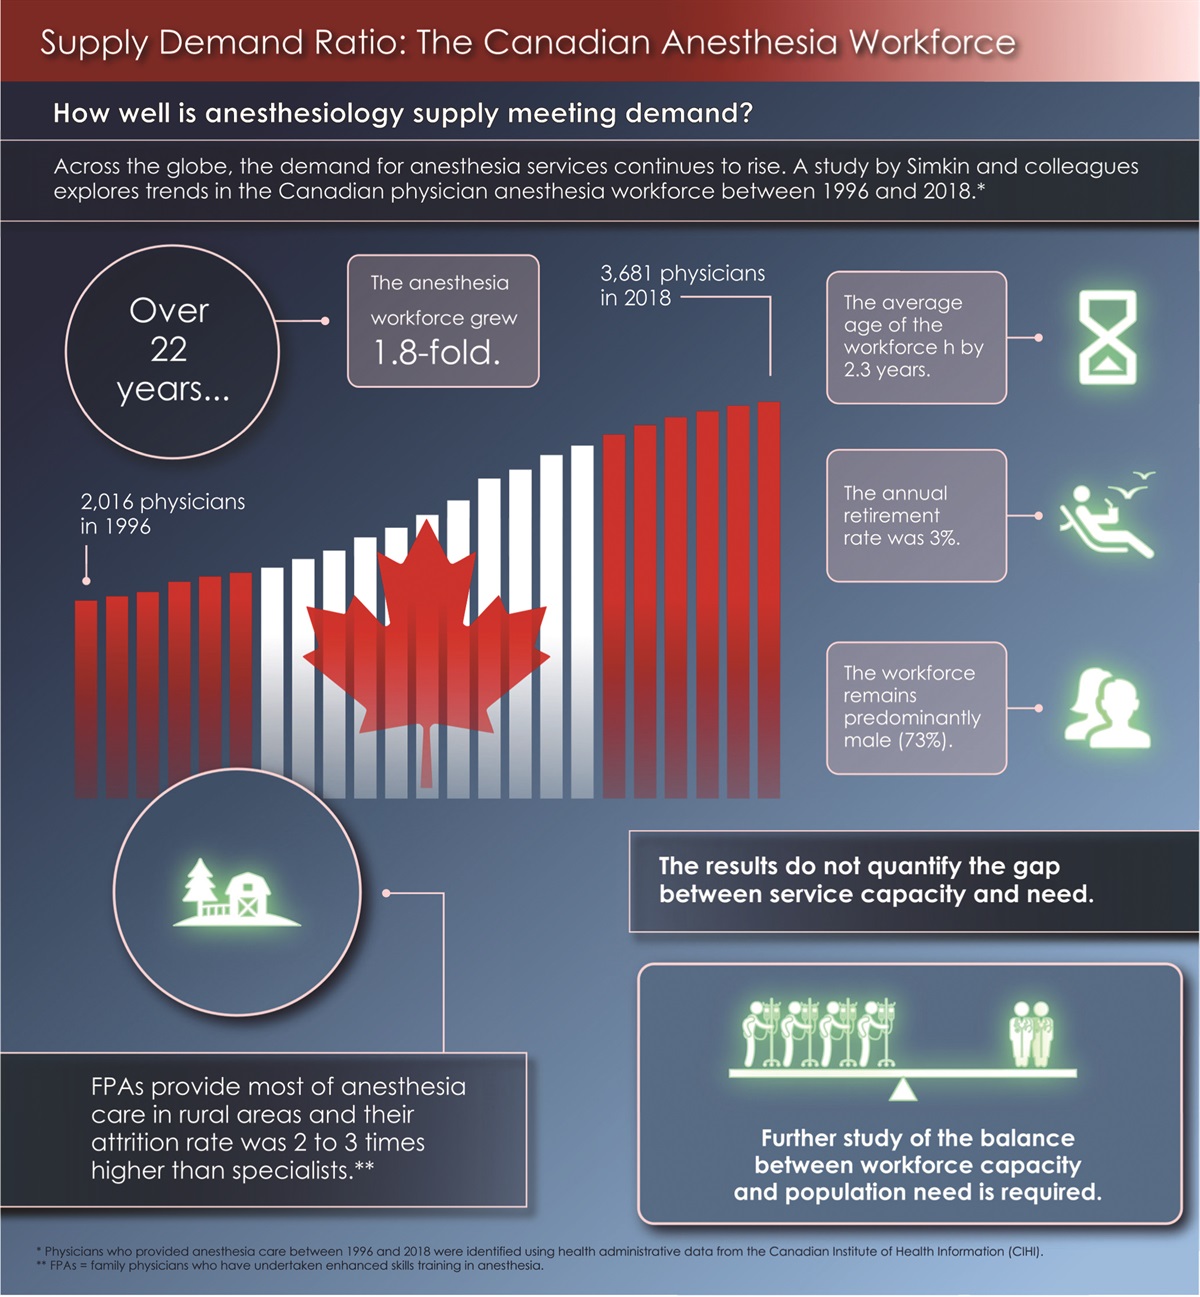 Supply Demand Ratio: The Canadian Anesthesia Workforce